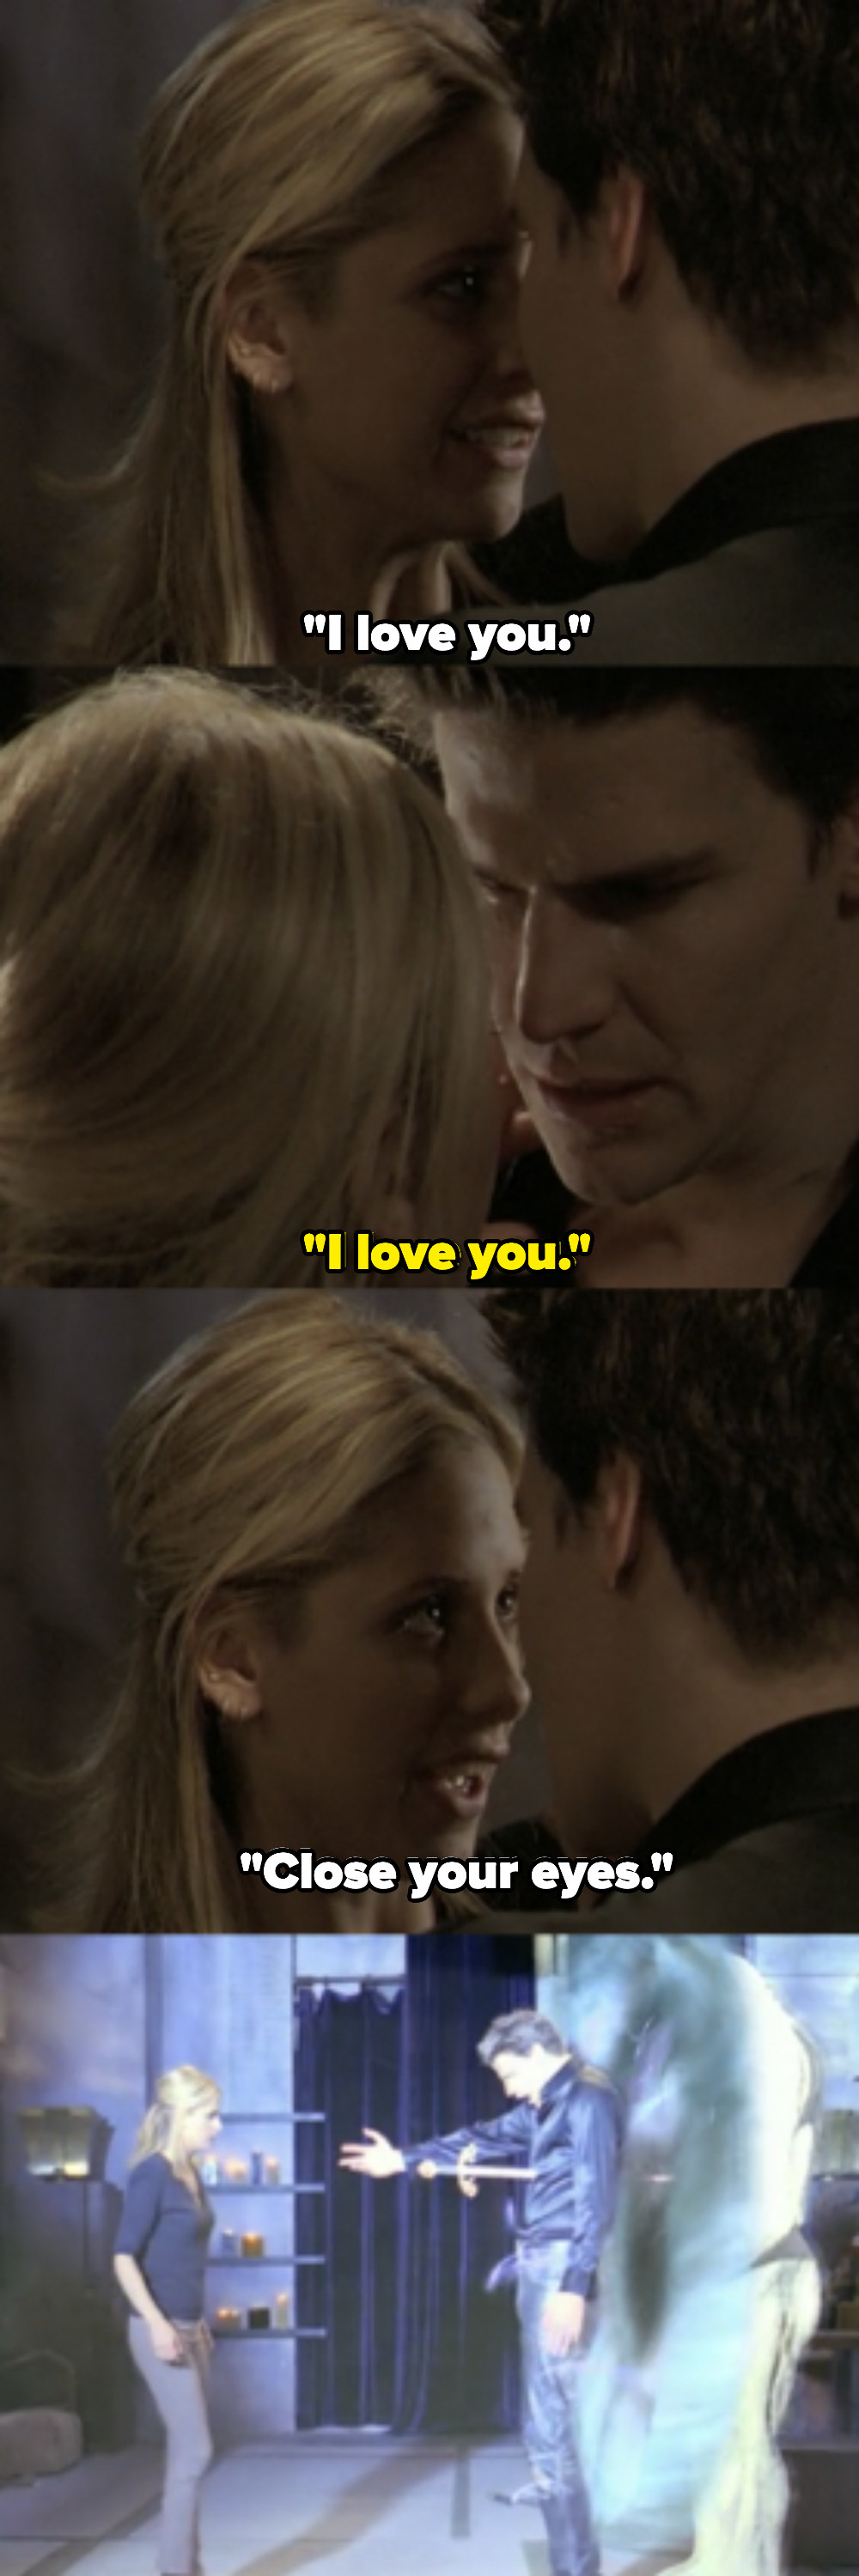 They both say I love you, then Buffy says to close his eyes and stabs him, pushing him into the portal